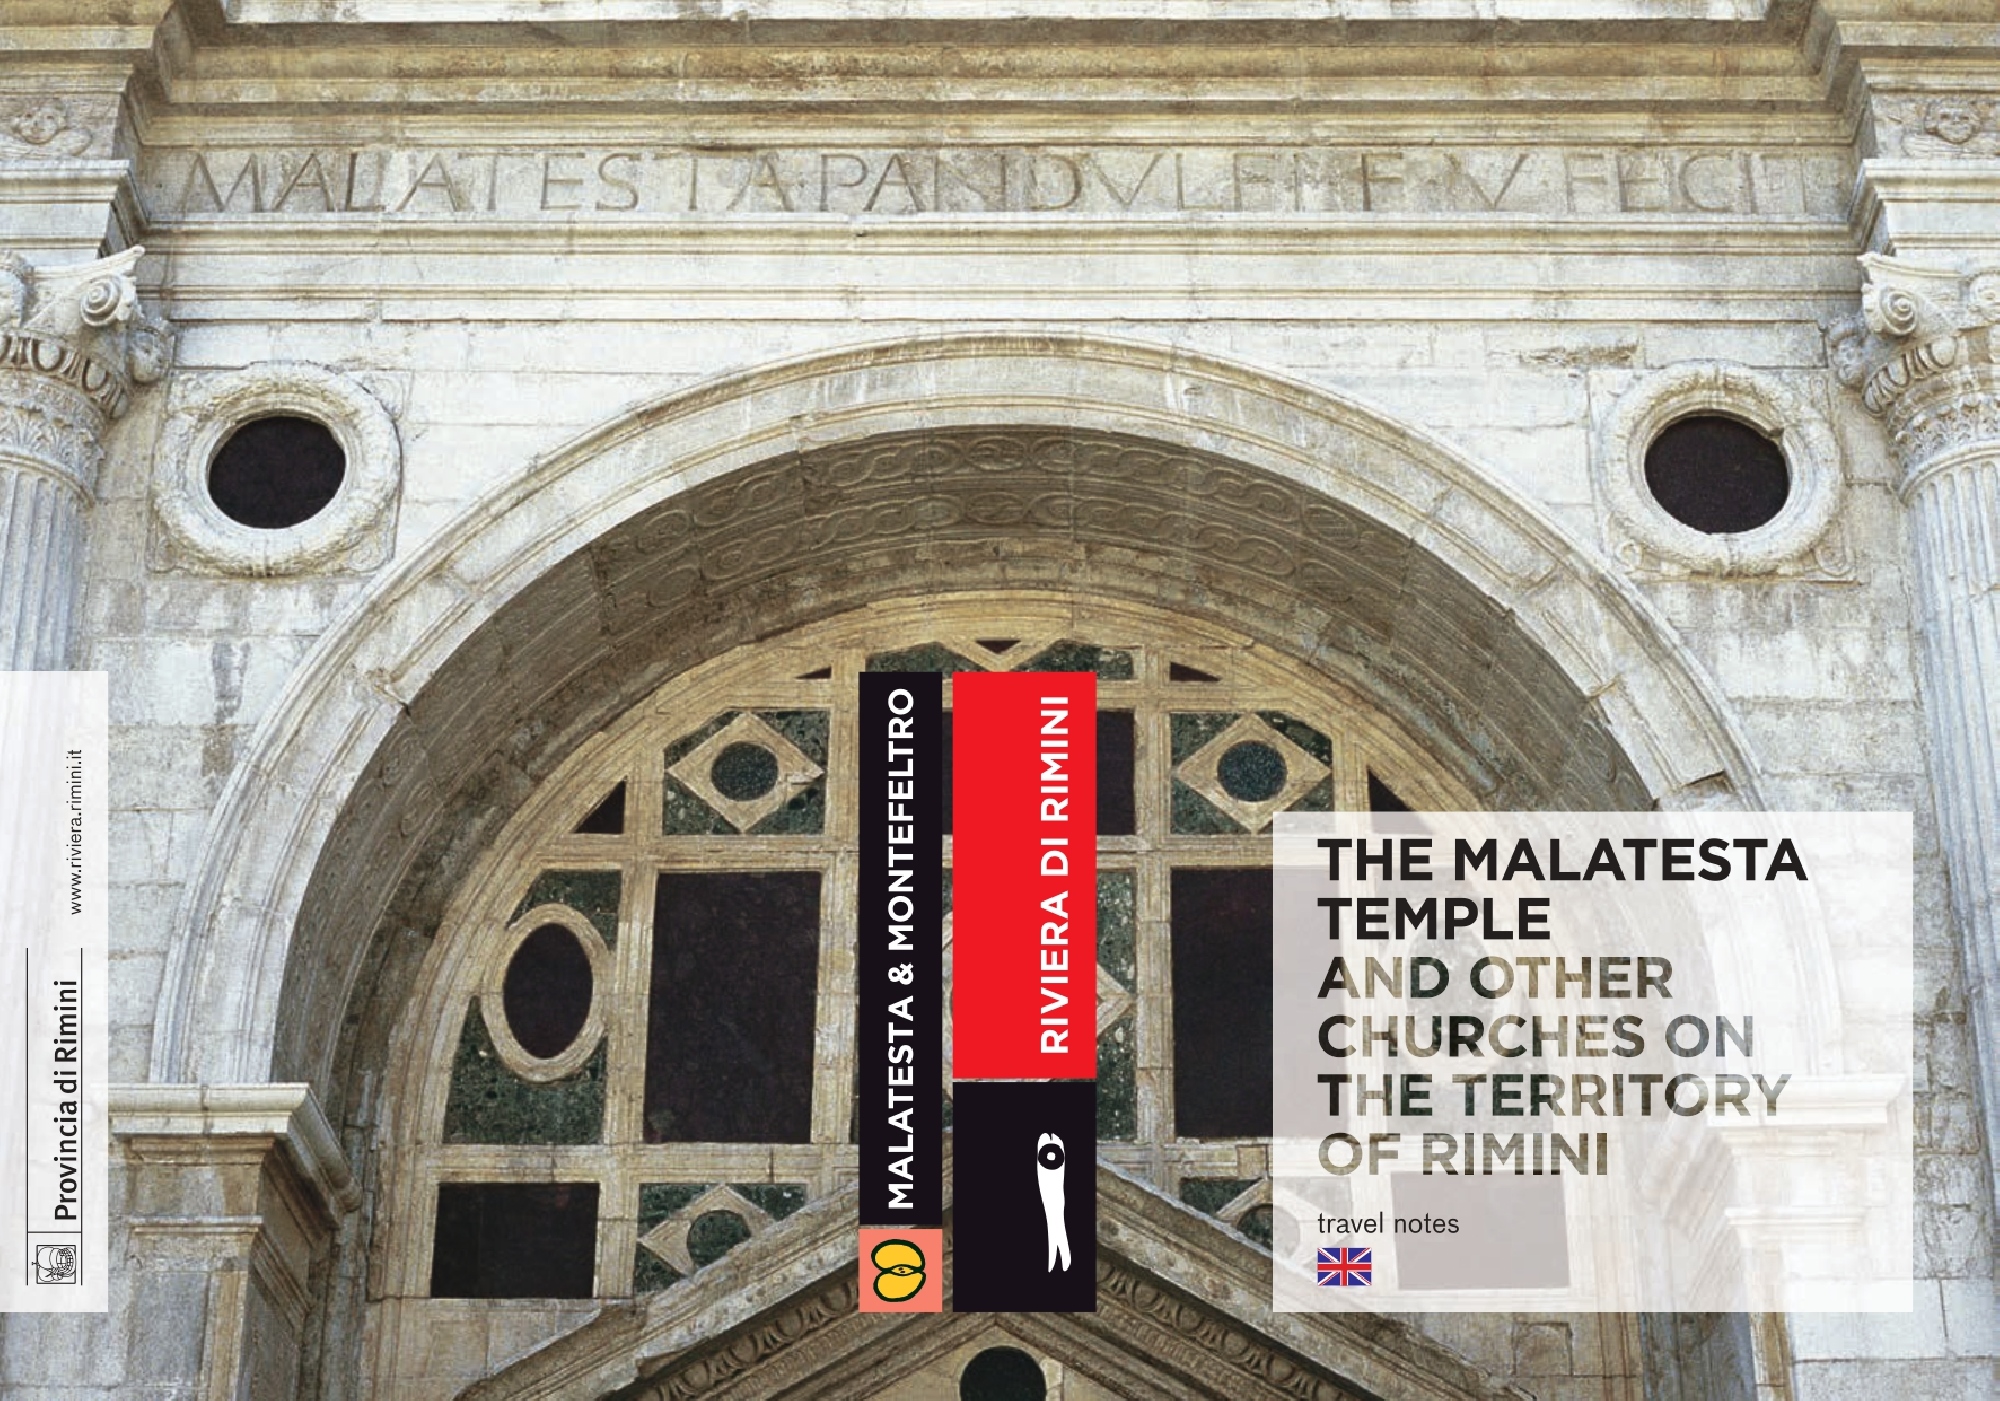 PDF: The Malatesta temple and other churches on the territory of Rimini EN 5.01M